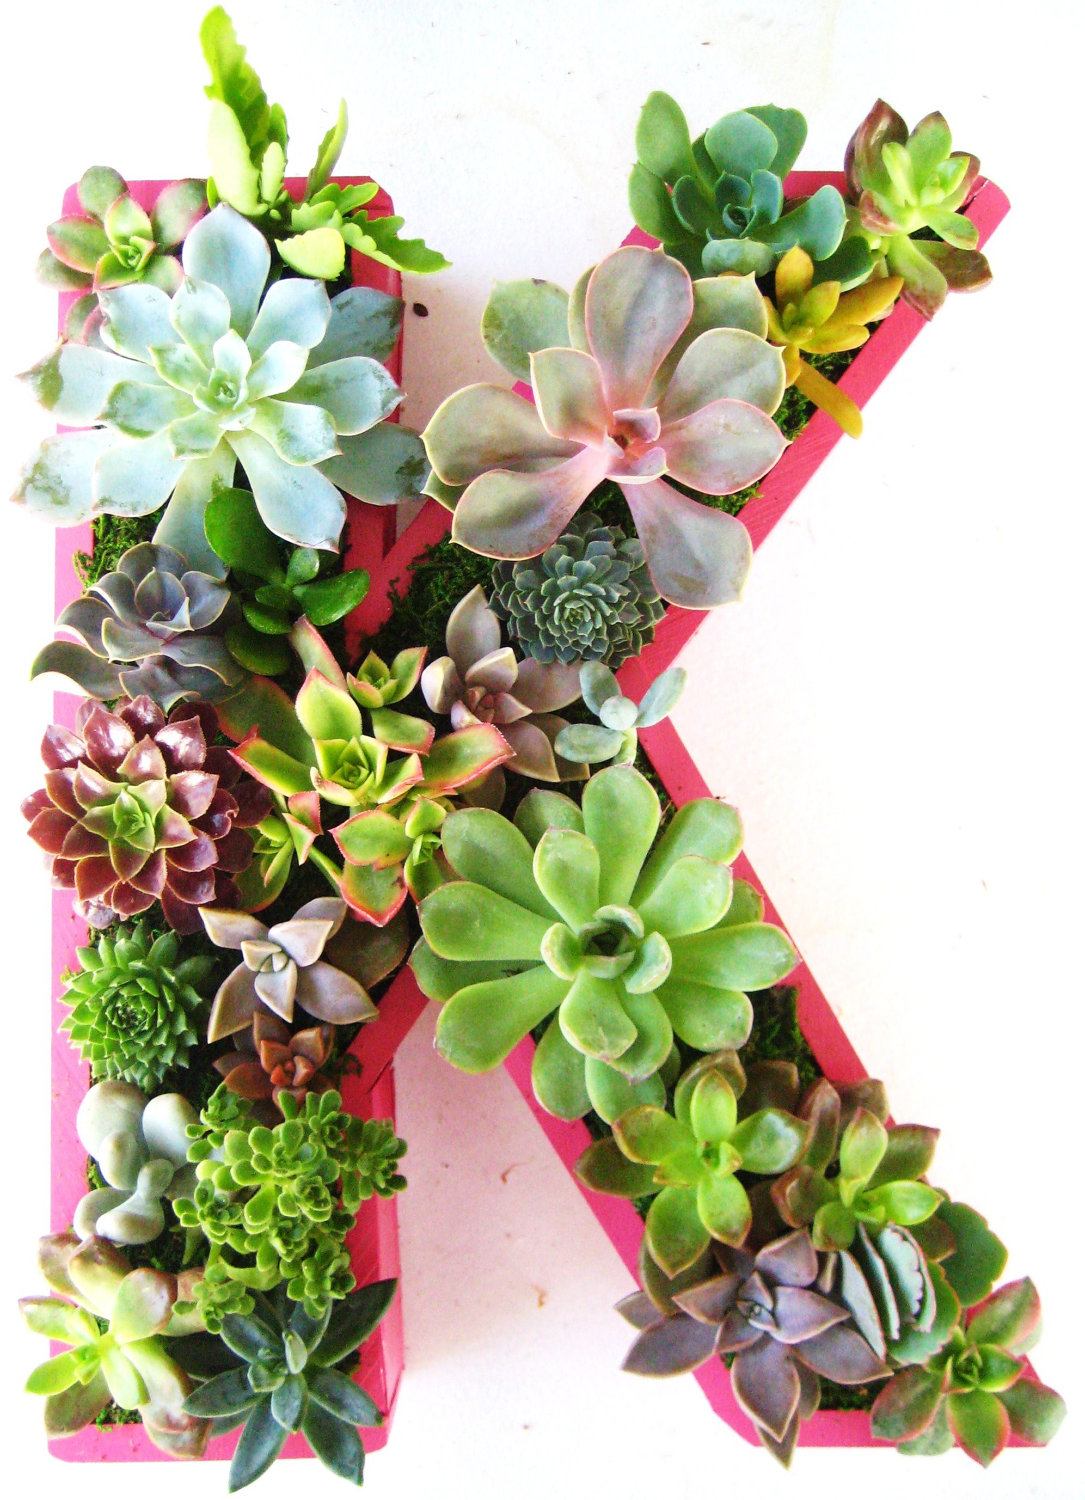 15-Natural-and-Handmade-Living-Succulent-Decorations-7.jpg